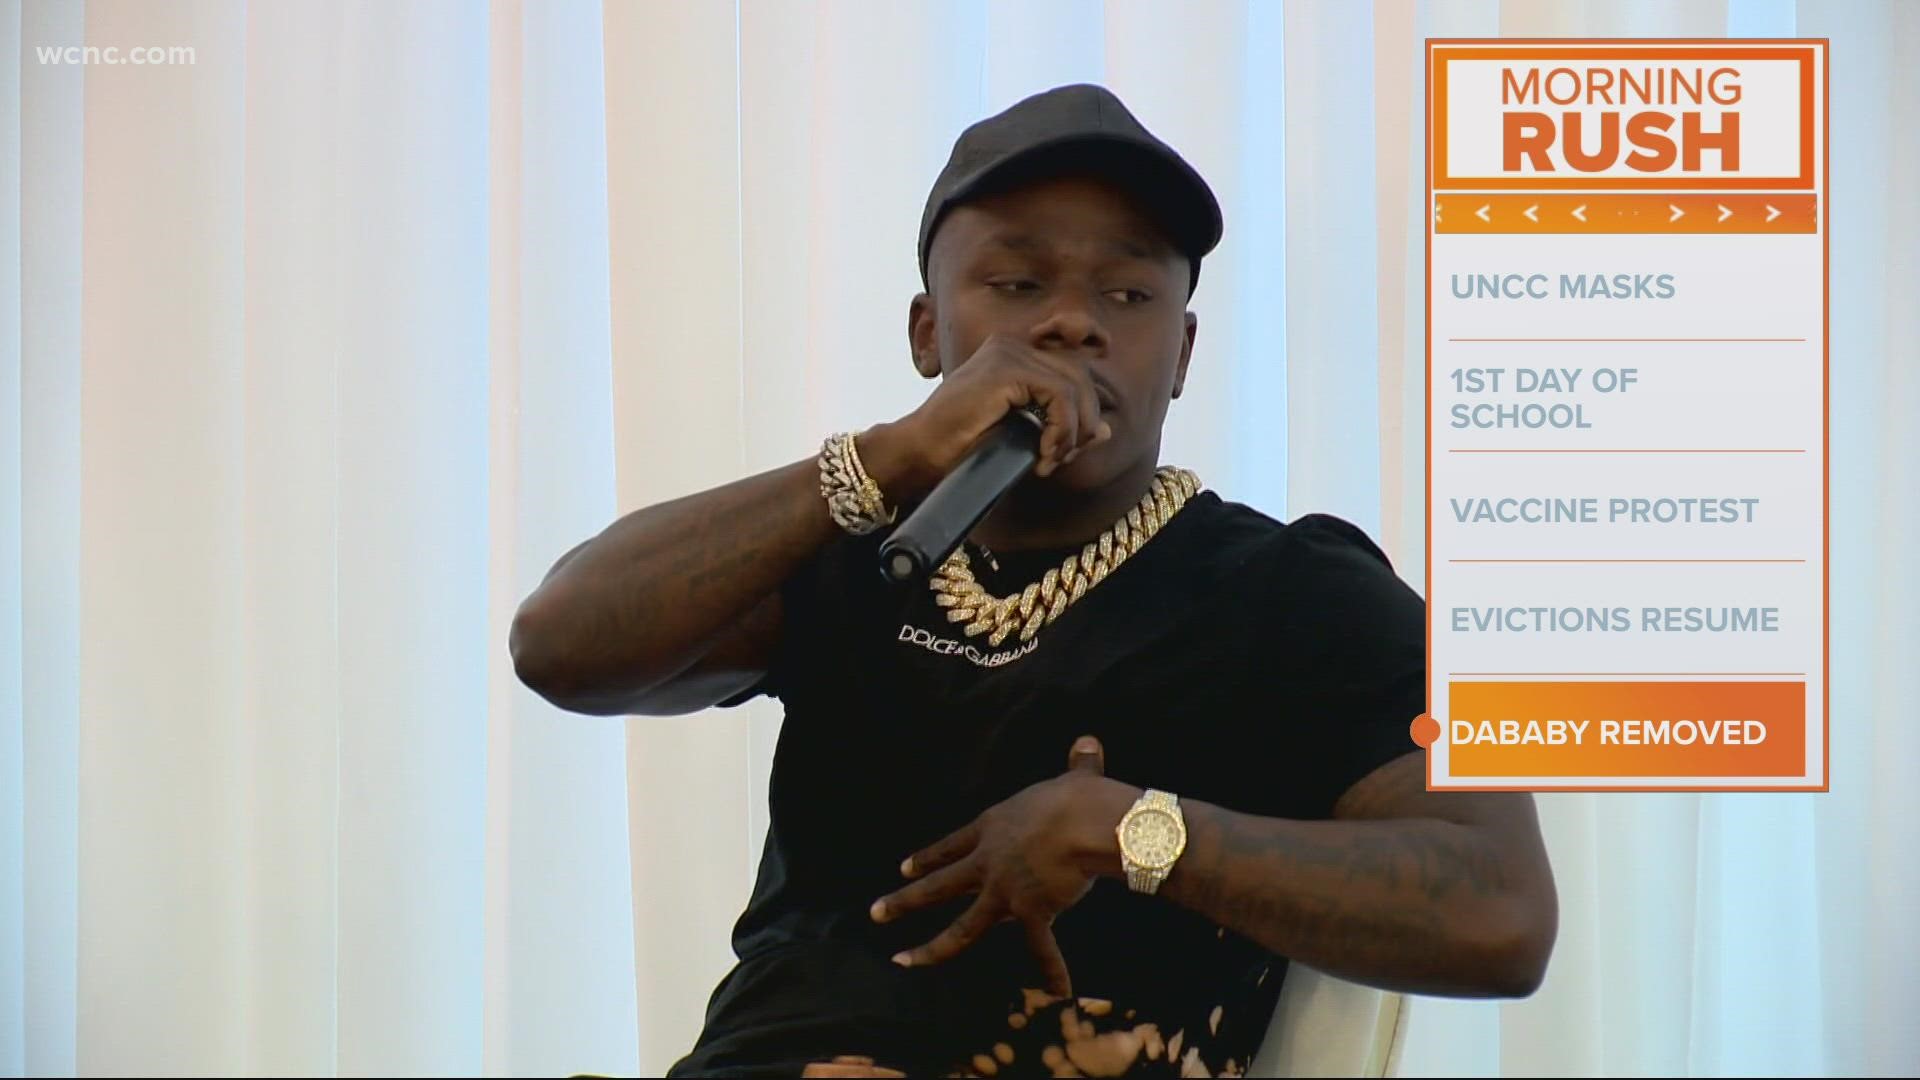 Charlotte rapper DaBaby was cut from the Lollapalooza lineup following crude and homophobic comments he made last week at a Miami-area music festival.